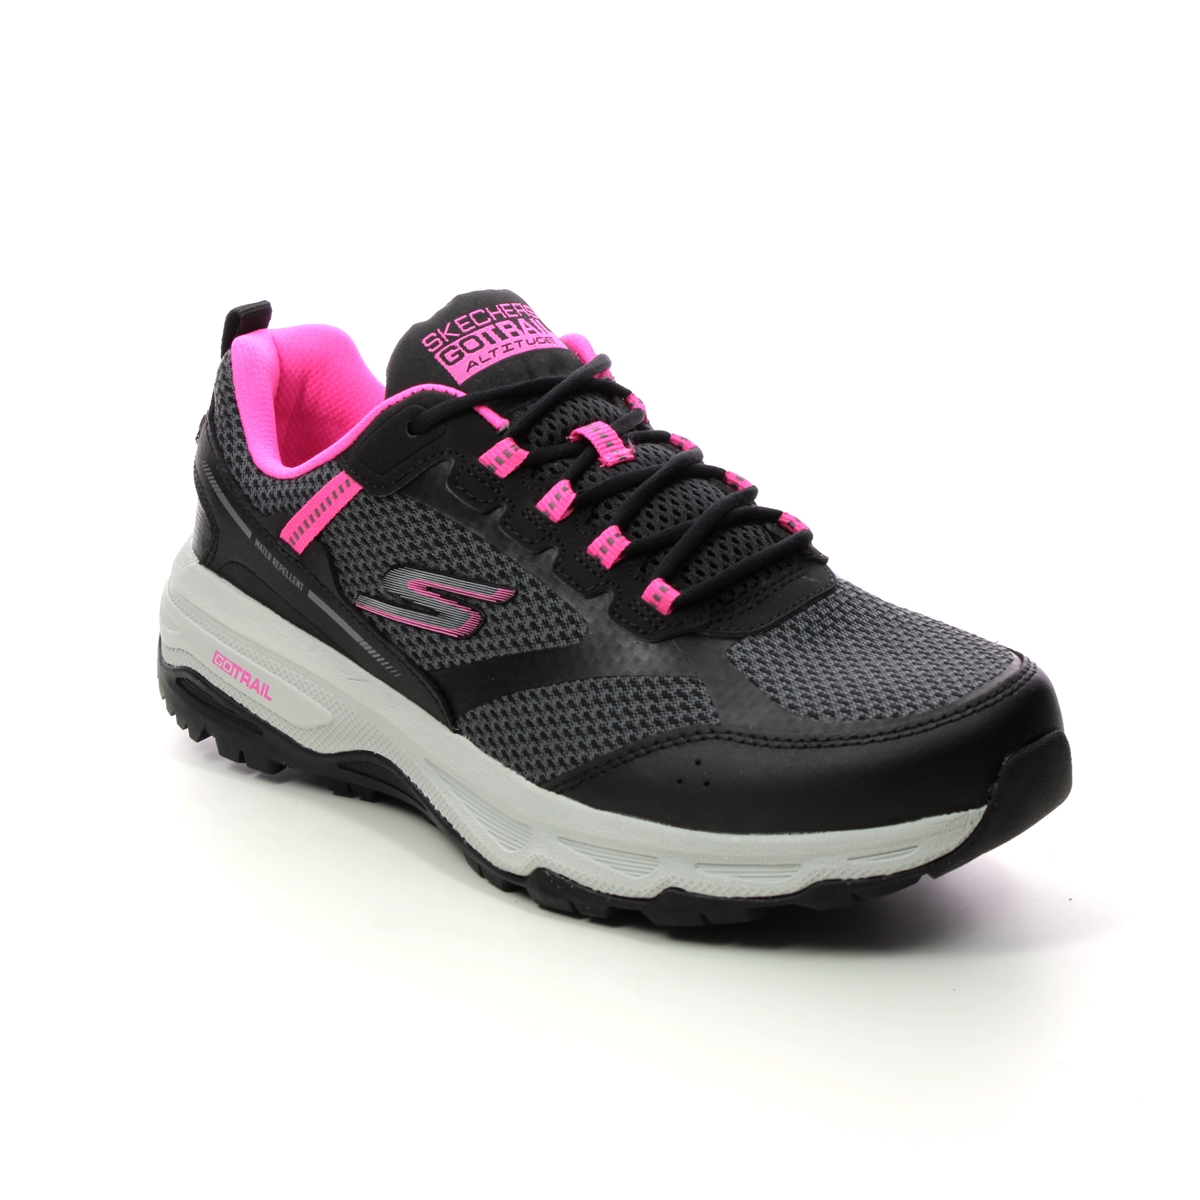 Skechers Go Run Trail Black Pink Womens Trainers 128200 In Size 5 In Plain Black Pink